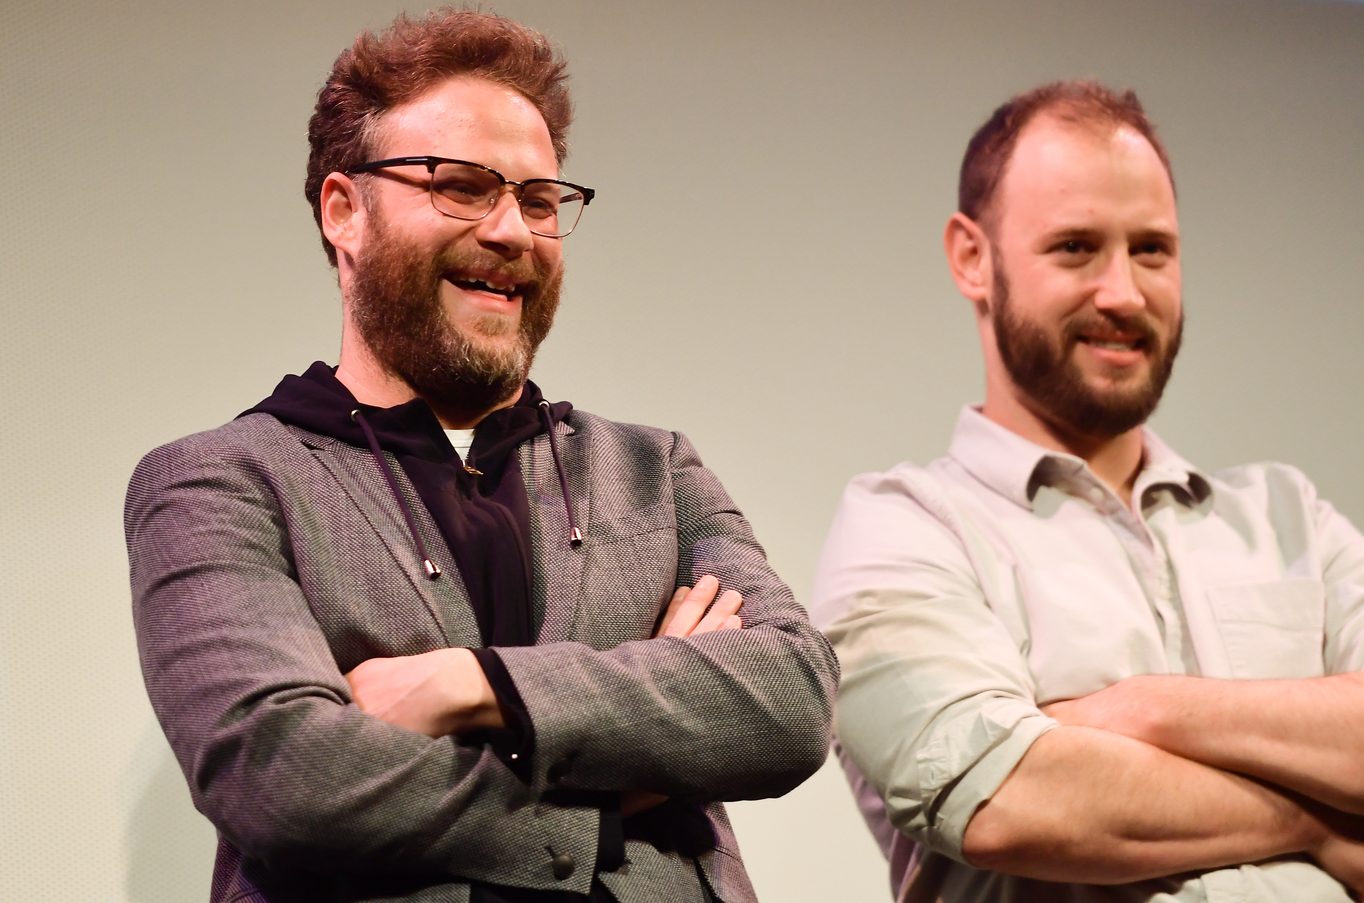 Seth Rogen and Evan Goldberg attend the Good Boys world premiere at the Paramount Theatre.